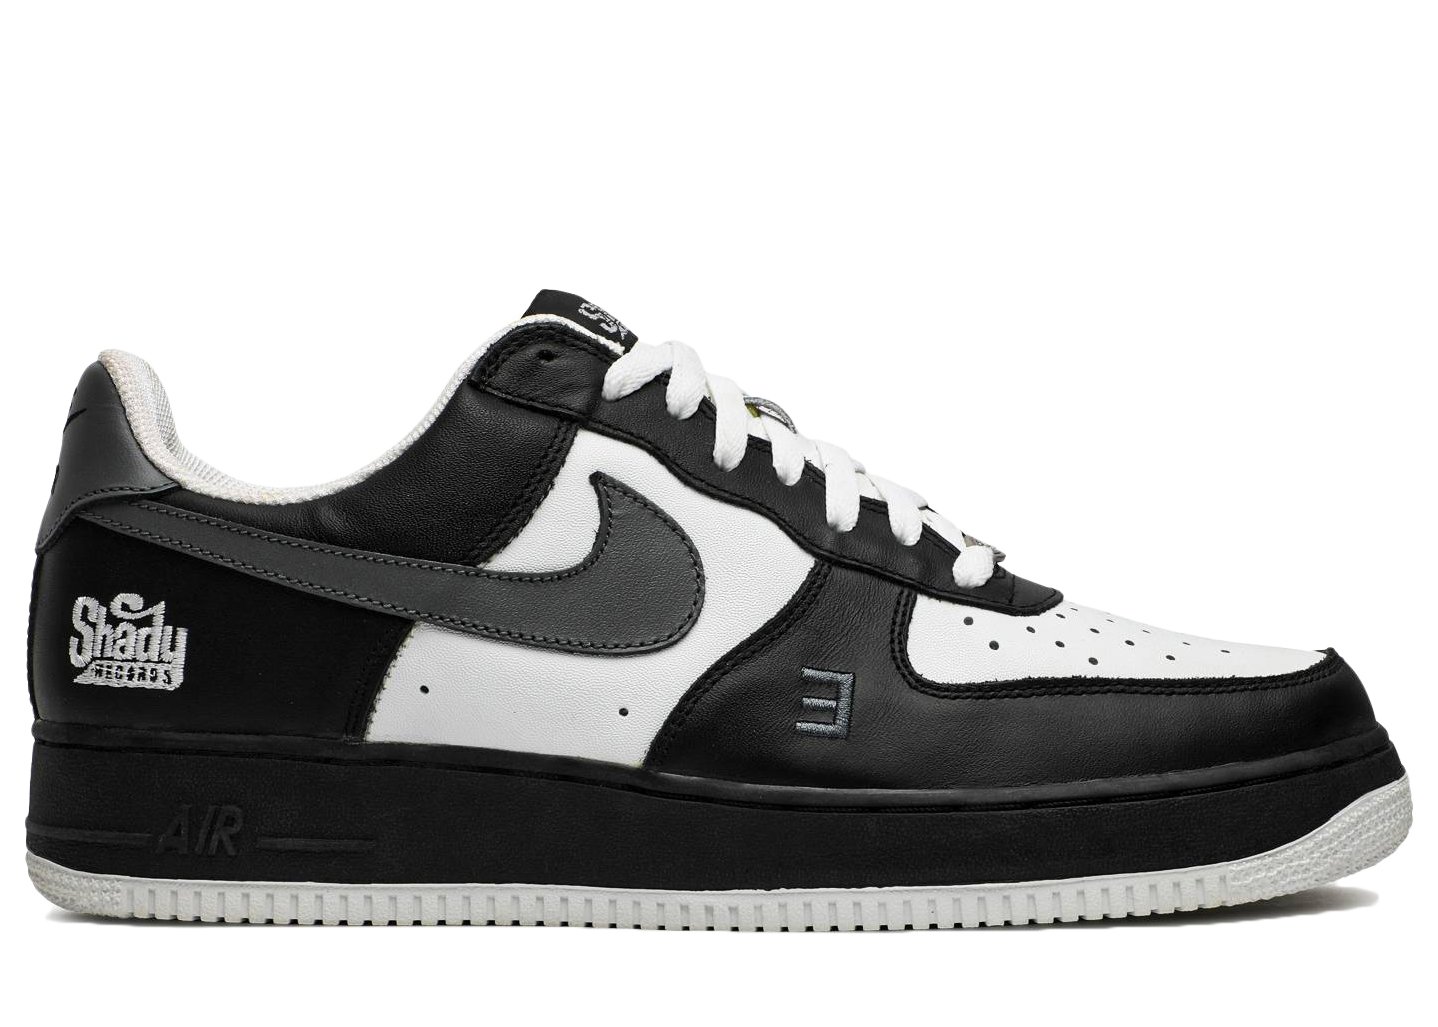 sneakers Nike Air Force 1 Low x Eminem 'Shady Records' Black